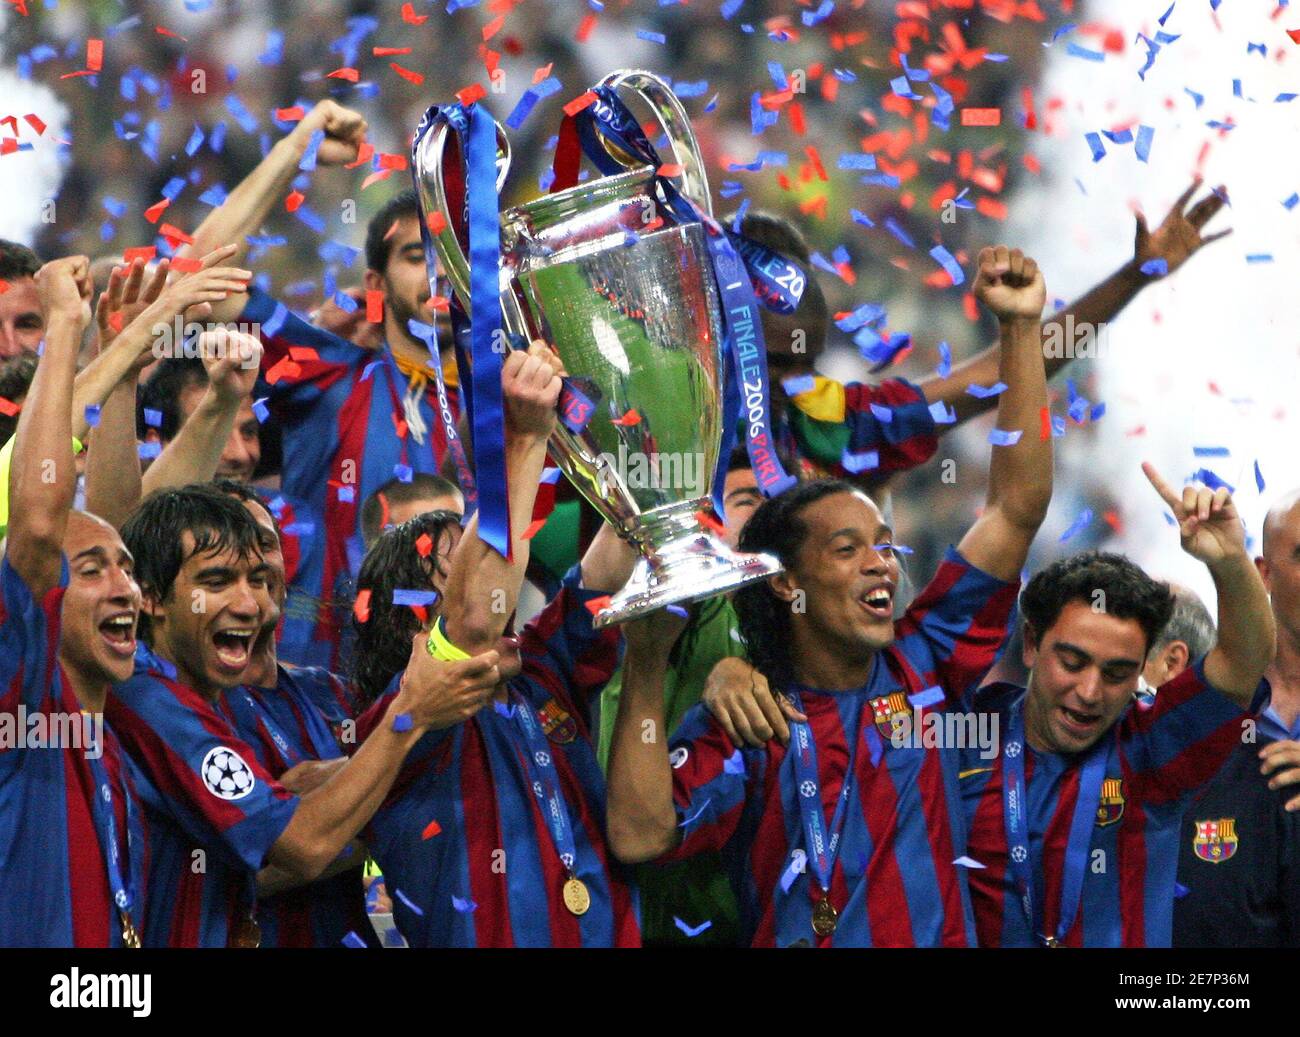 The Barcelona team celebrates winning the Champions League final soccer  match against Arsenal at the Stade